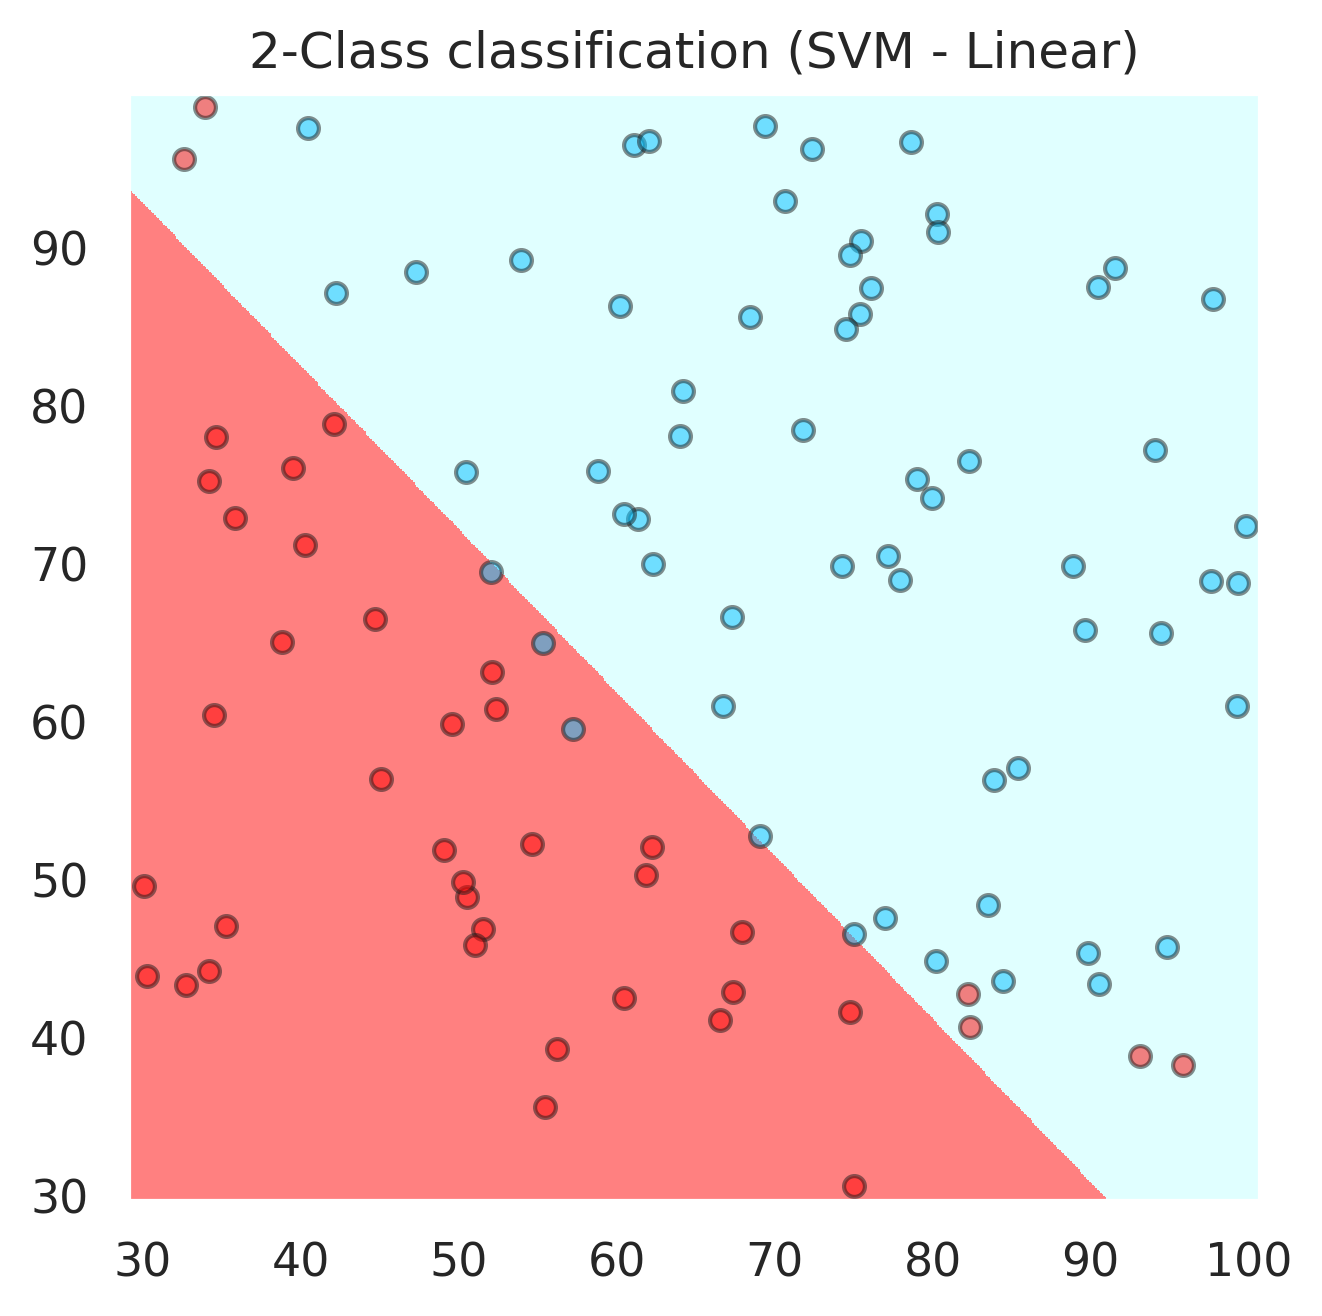 _images/Supervised_Learning_Logistic_Regression_40_0.png